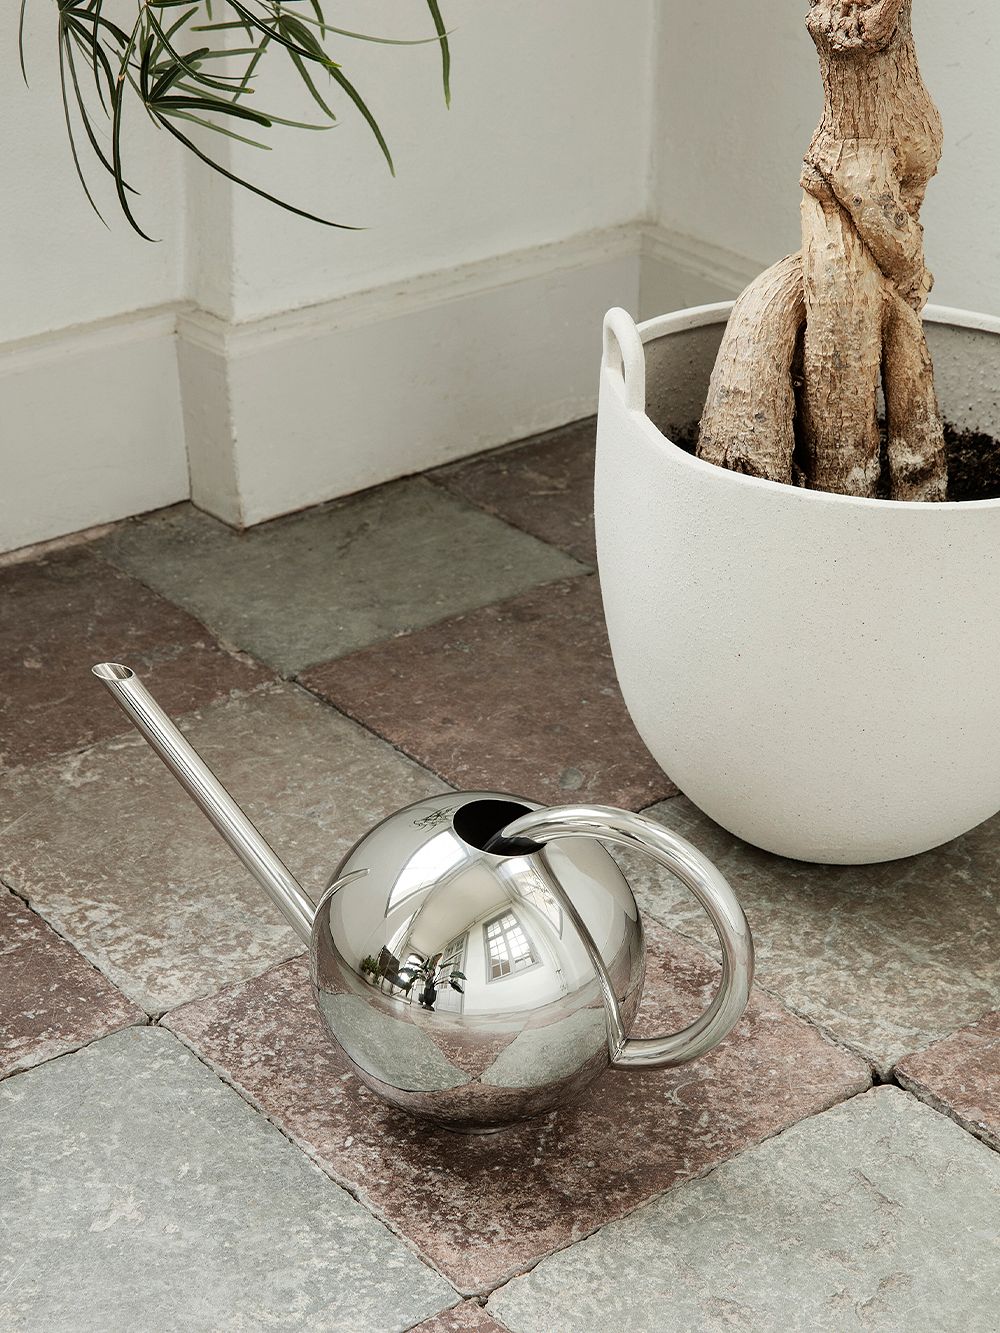 ferm LIVING Orb watering can, mirror polished steel